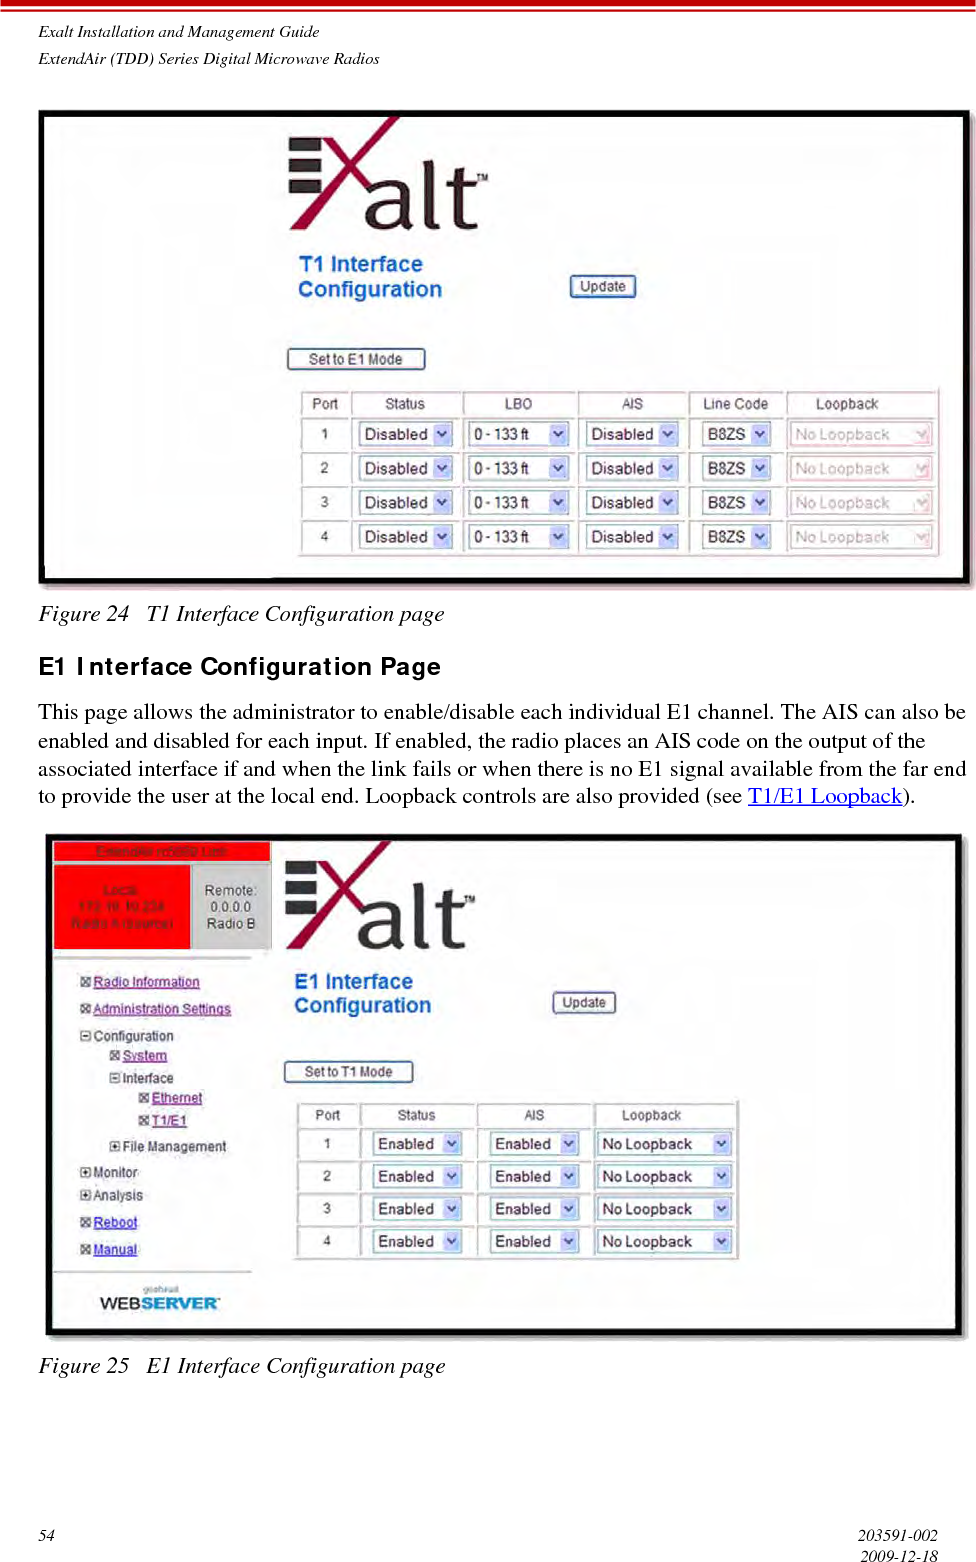 Exalt Installation and Management GuideExtendAir (TDD) Series Digital Microwave Radios54 203591-0022009-12-18Figure 24   T1 Interface Configuration pageE1 Interface Configuration PageThis page allows the administrator to enable/disable each individual E1 channel. The AIS can also be enabled and disabled for each input. If enabled, the radio places an AIS code on the output of the associated interface if and when the link fails or when there is no E1 signal available from the far end to provide the user at the local end. Loopback controls are also provided (see T1/E1 Loopback).Figure 25   E1 Interface Configuration page